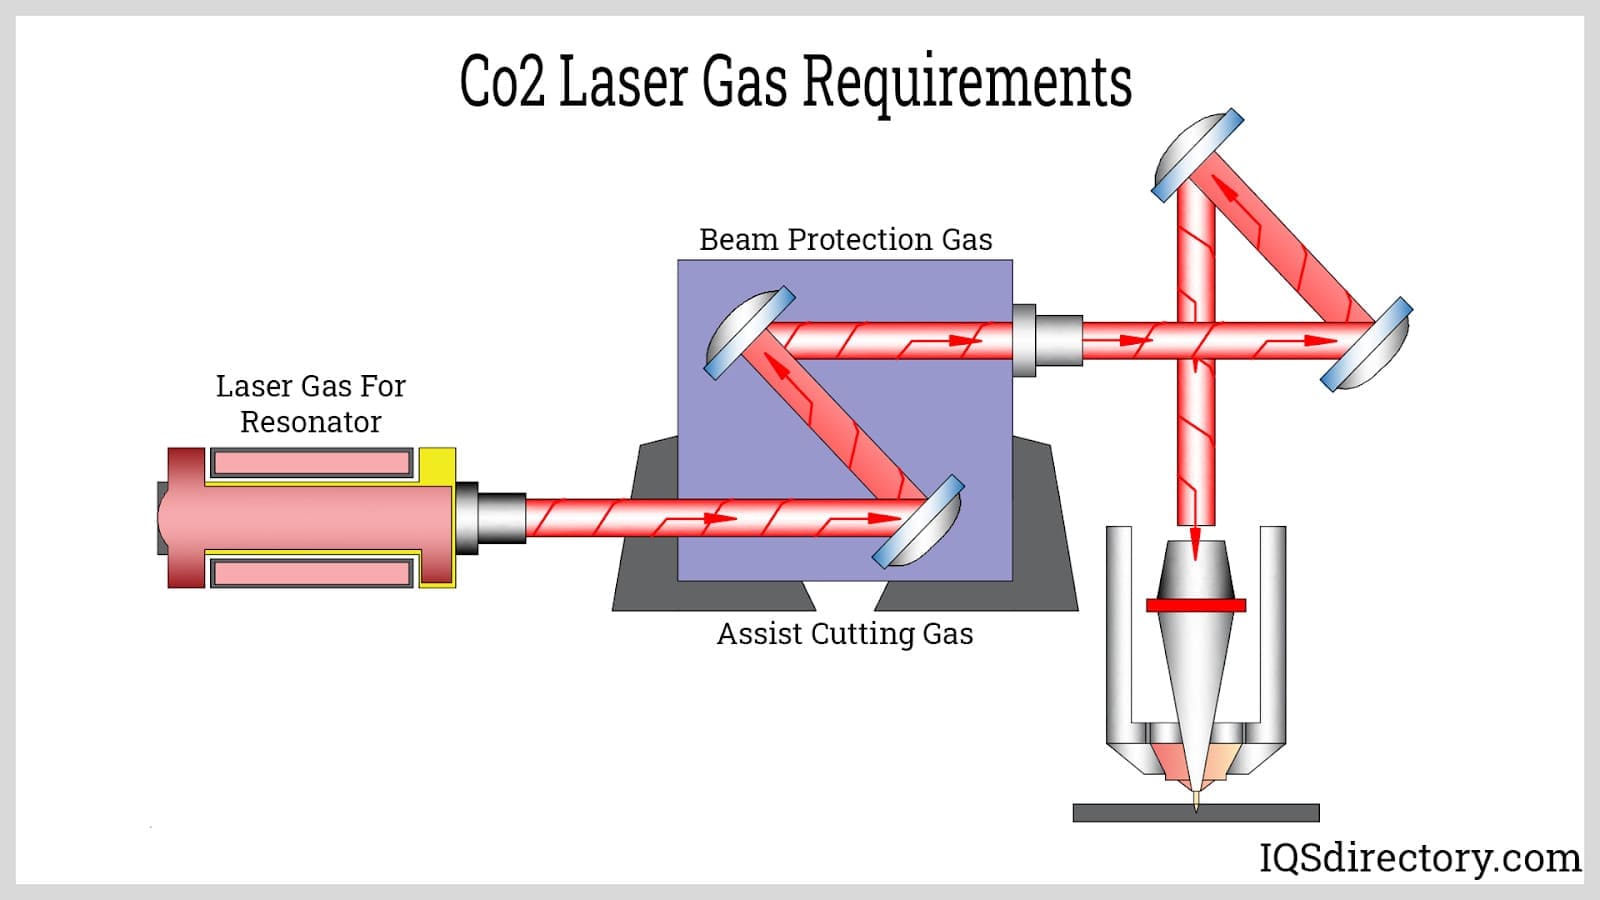 CO2 laser Gas Requirements